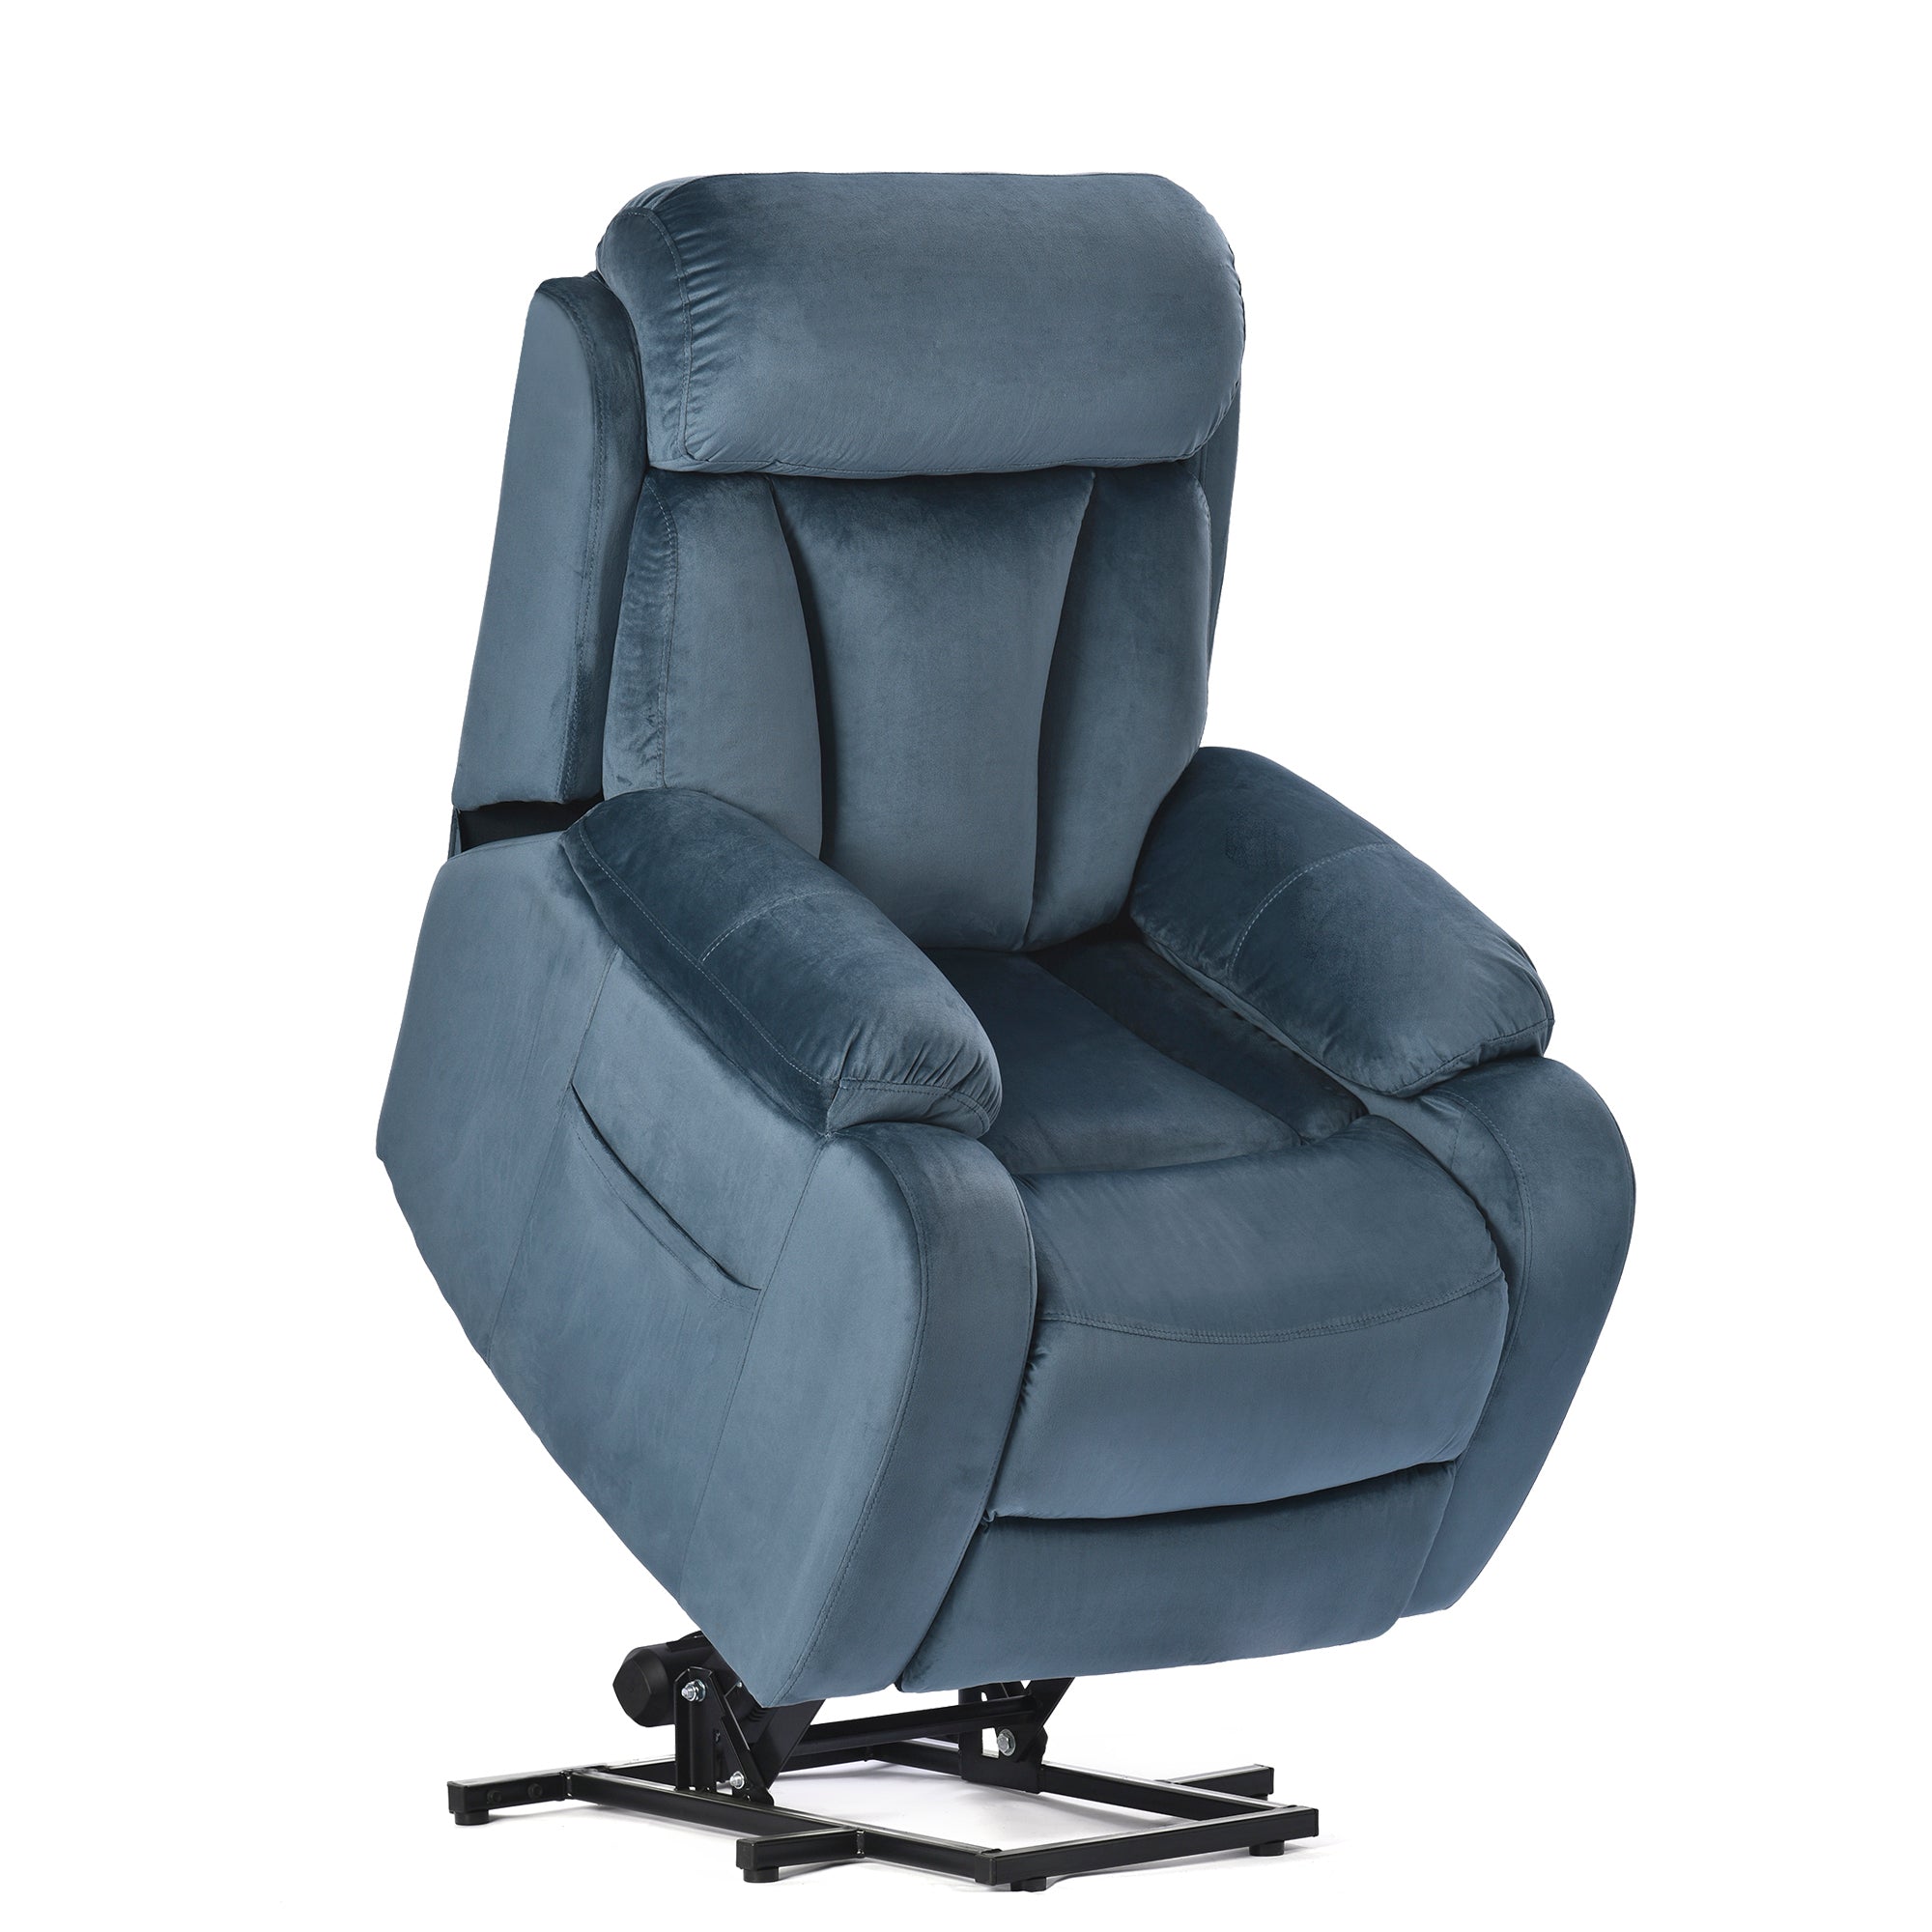 Lift Chair Recliner with Australia Cashmere Fabric, angle lifted